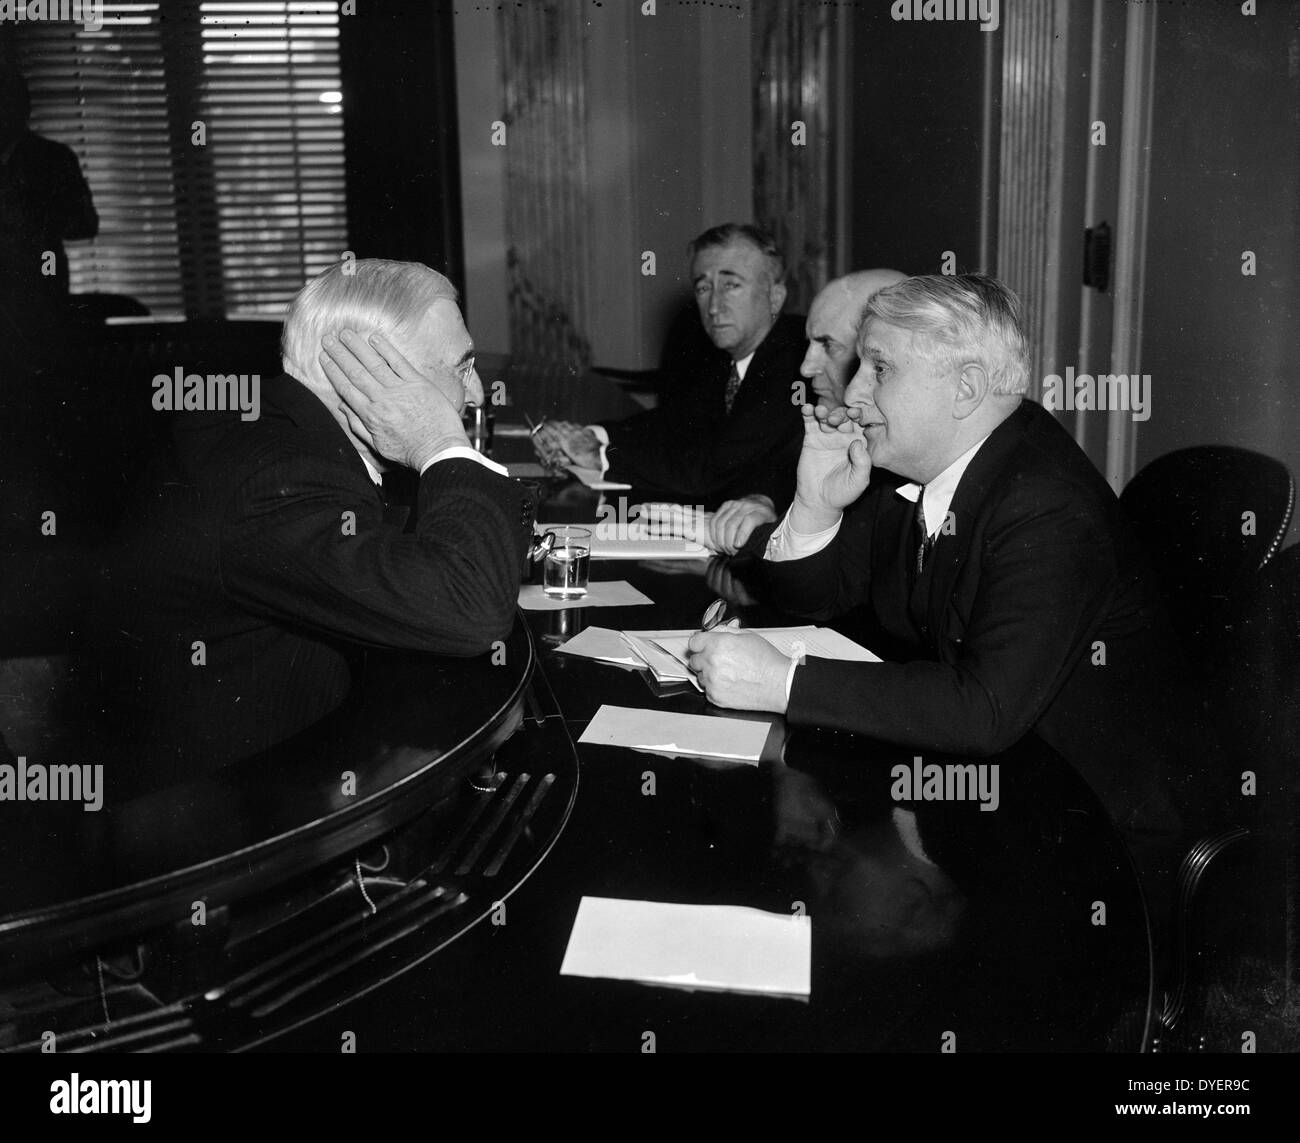 Washington, D.C., Feb. 28. Senator James J. Davis (left), Republican of Pennsylvania, gets another earful from Bernard Baruch following the noted Financier's blaming of the new deal policies for present unemployment before the Senate Unemployment and Relief Committee today. 19380101 Stock Photo